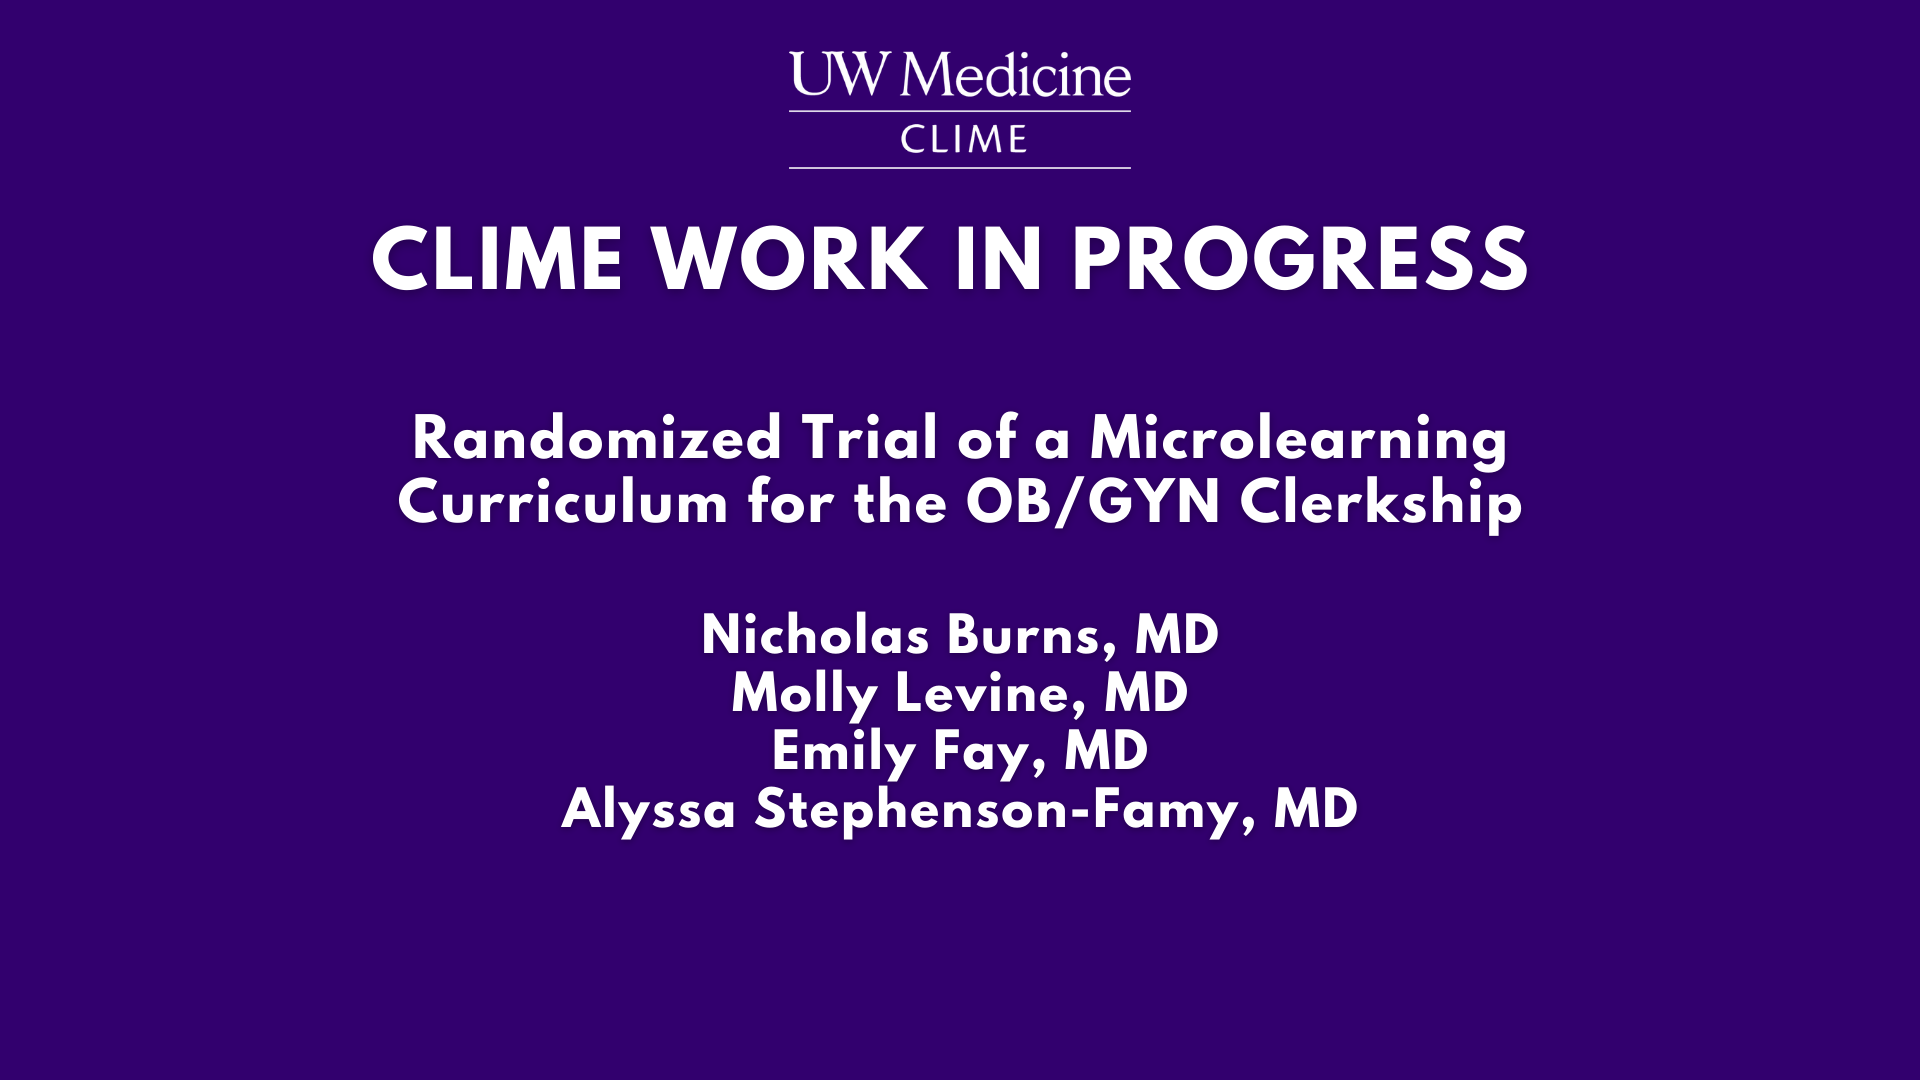 CLIME Work in Progress: Nick Burns, MD & Molly Levine, MD Banner